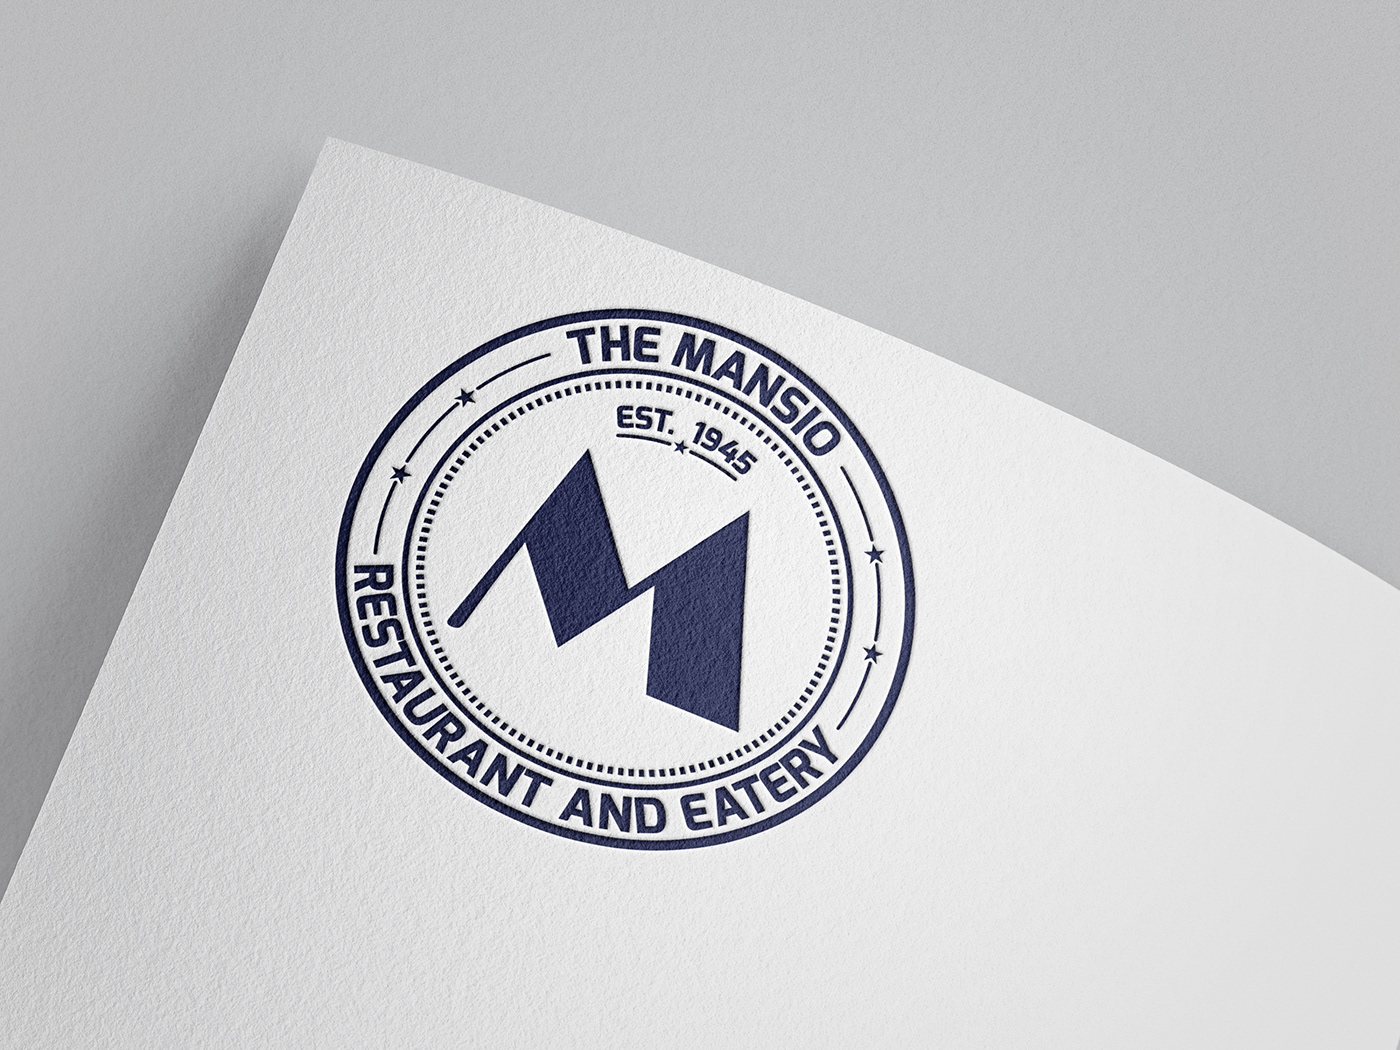 Swift Emblem Logo design
Please your order now to take the first step toward a remarkable logo for y